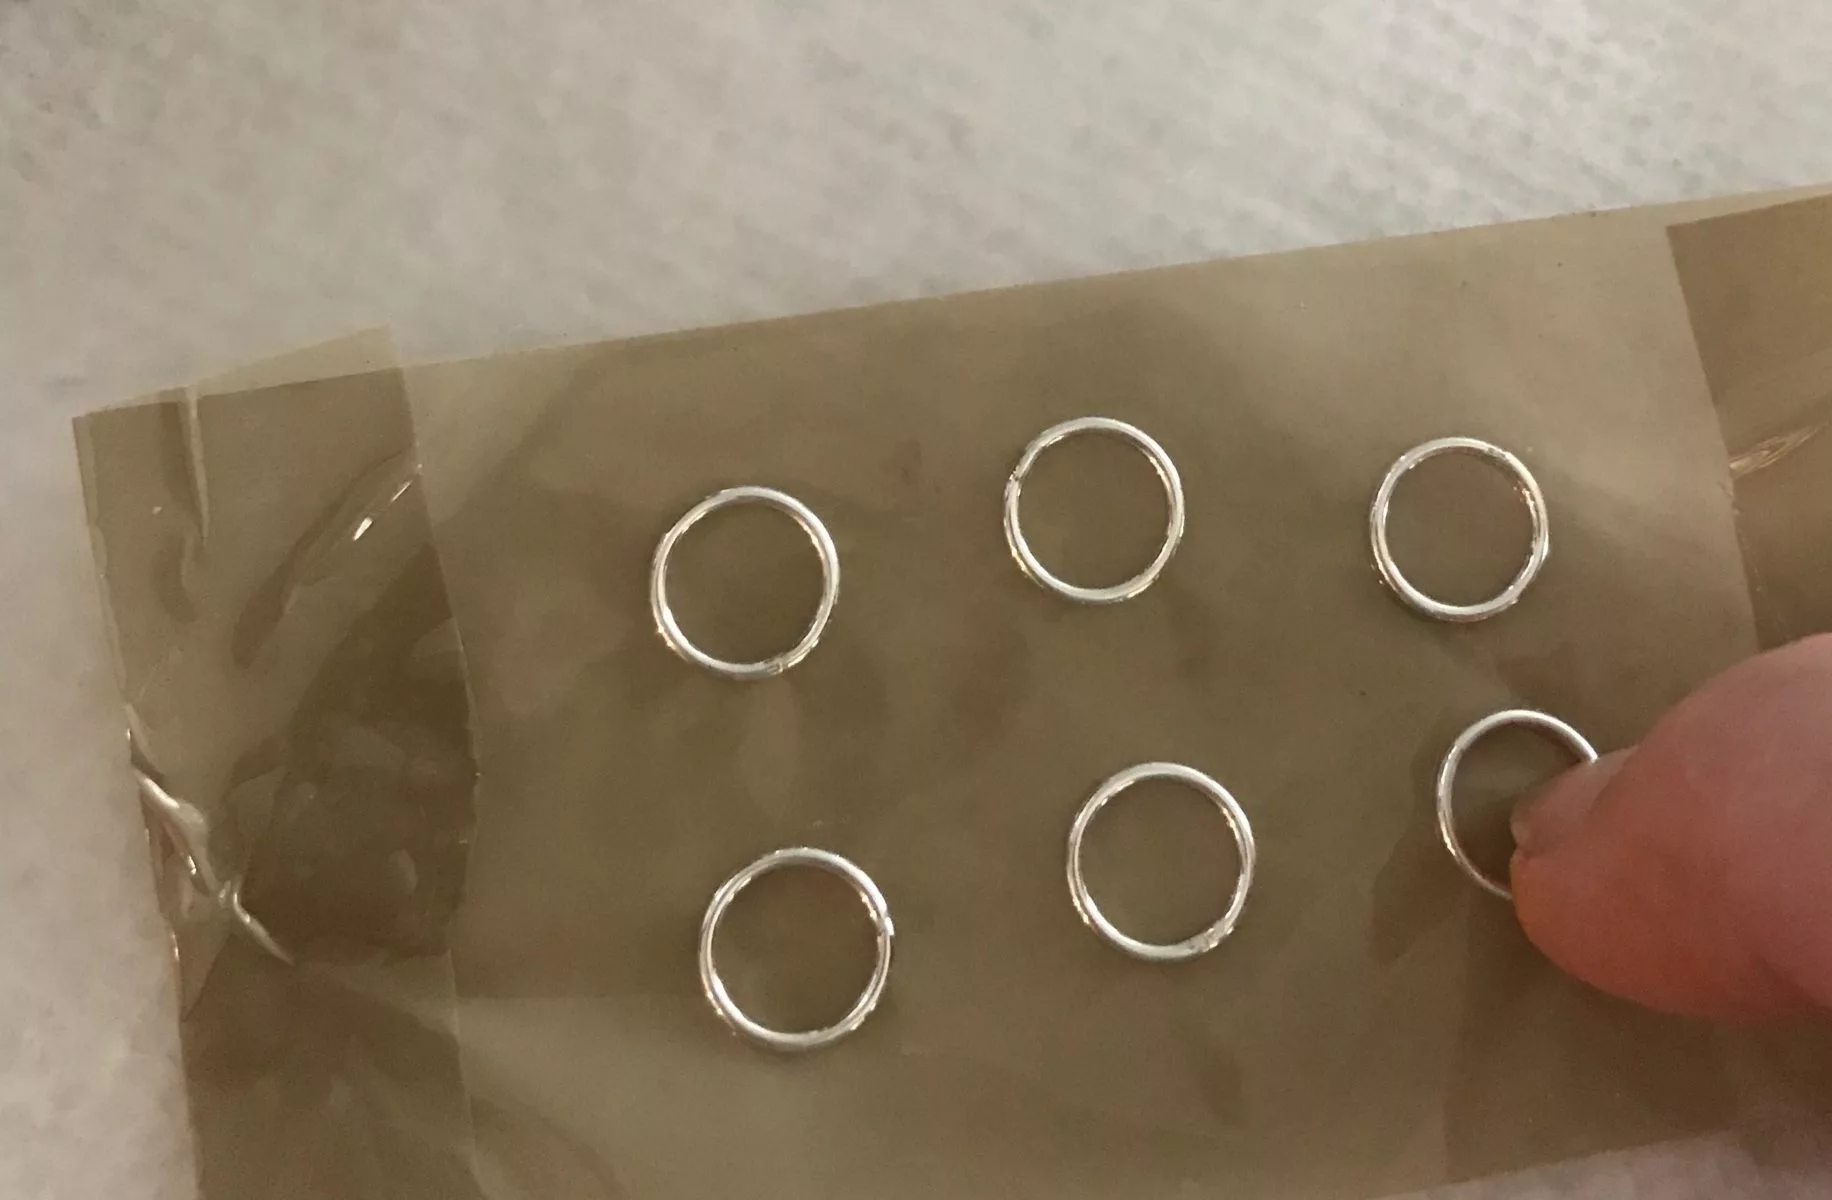 placing silver rings on packing tape